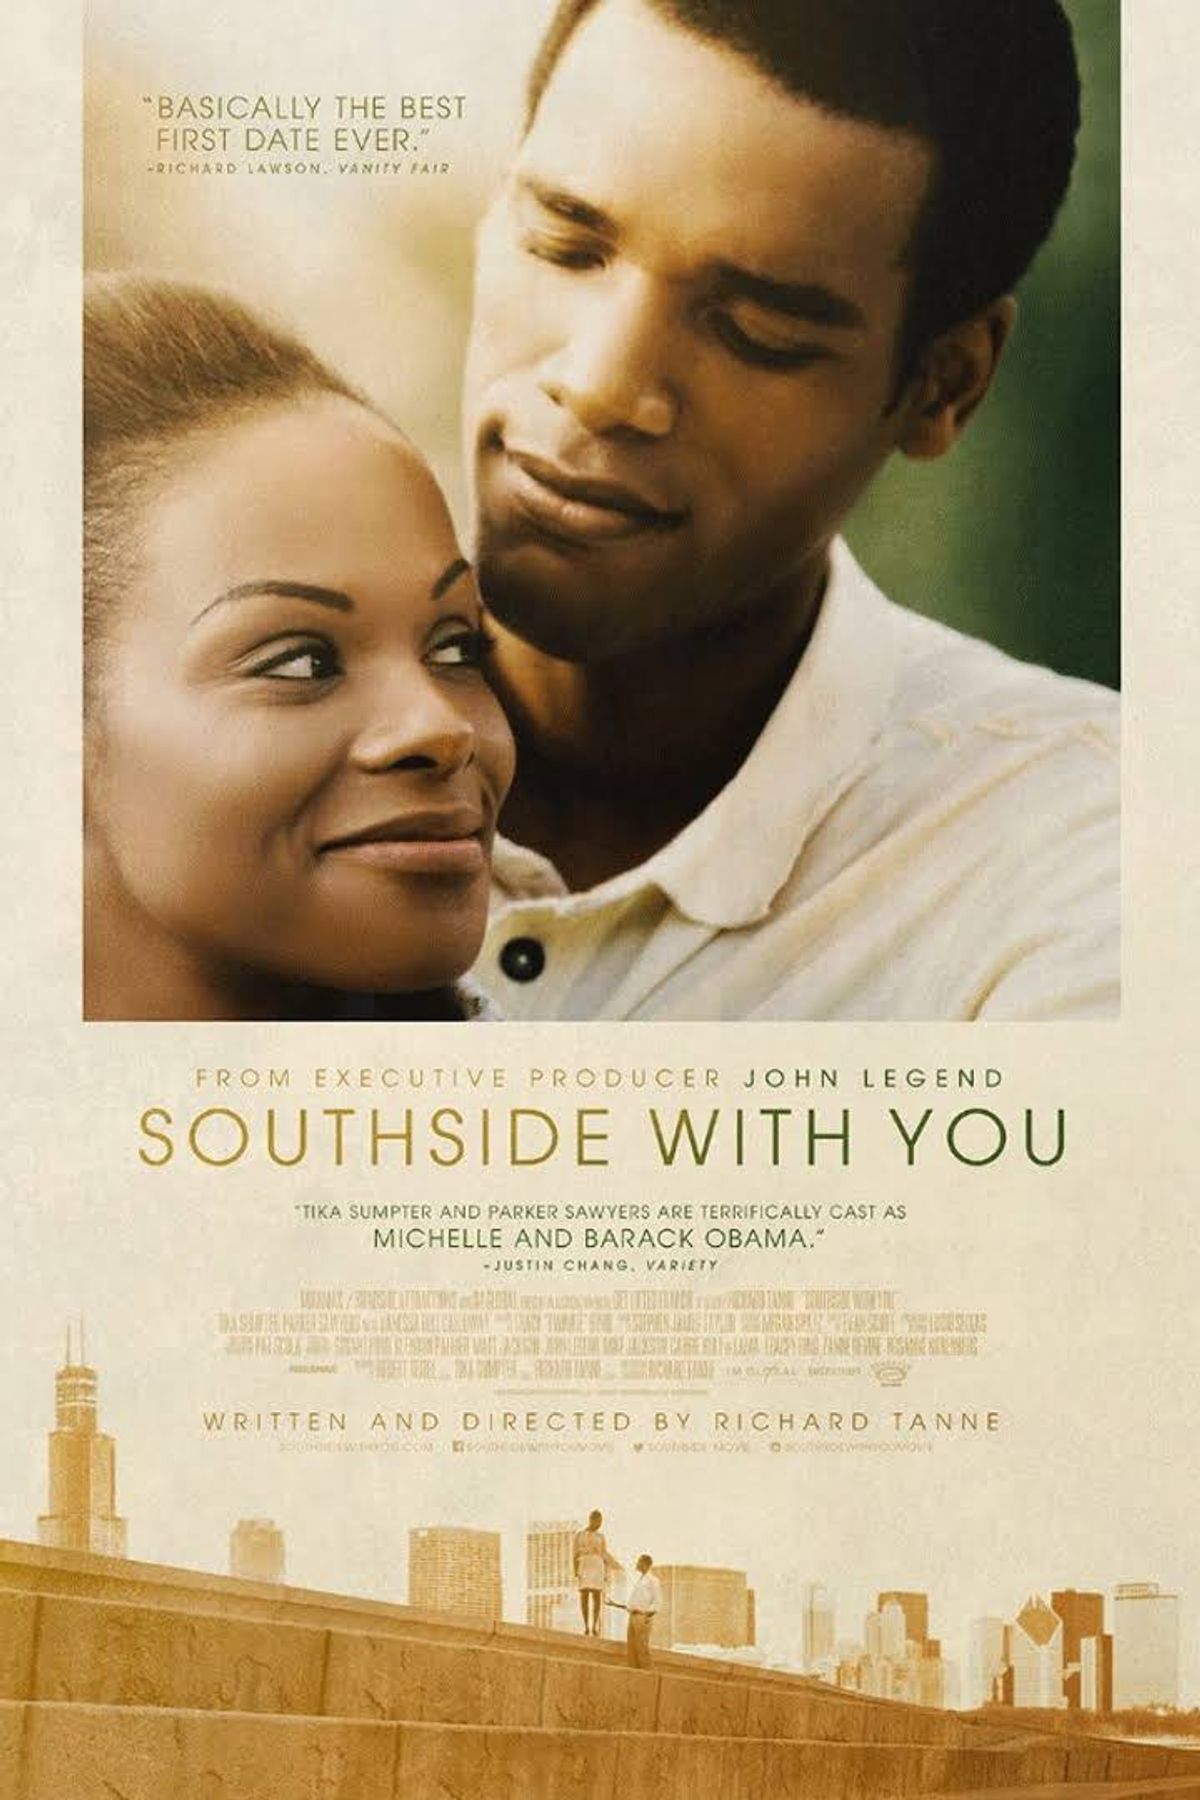 Why "Southside With You" Matters